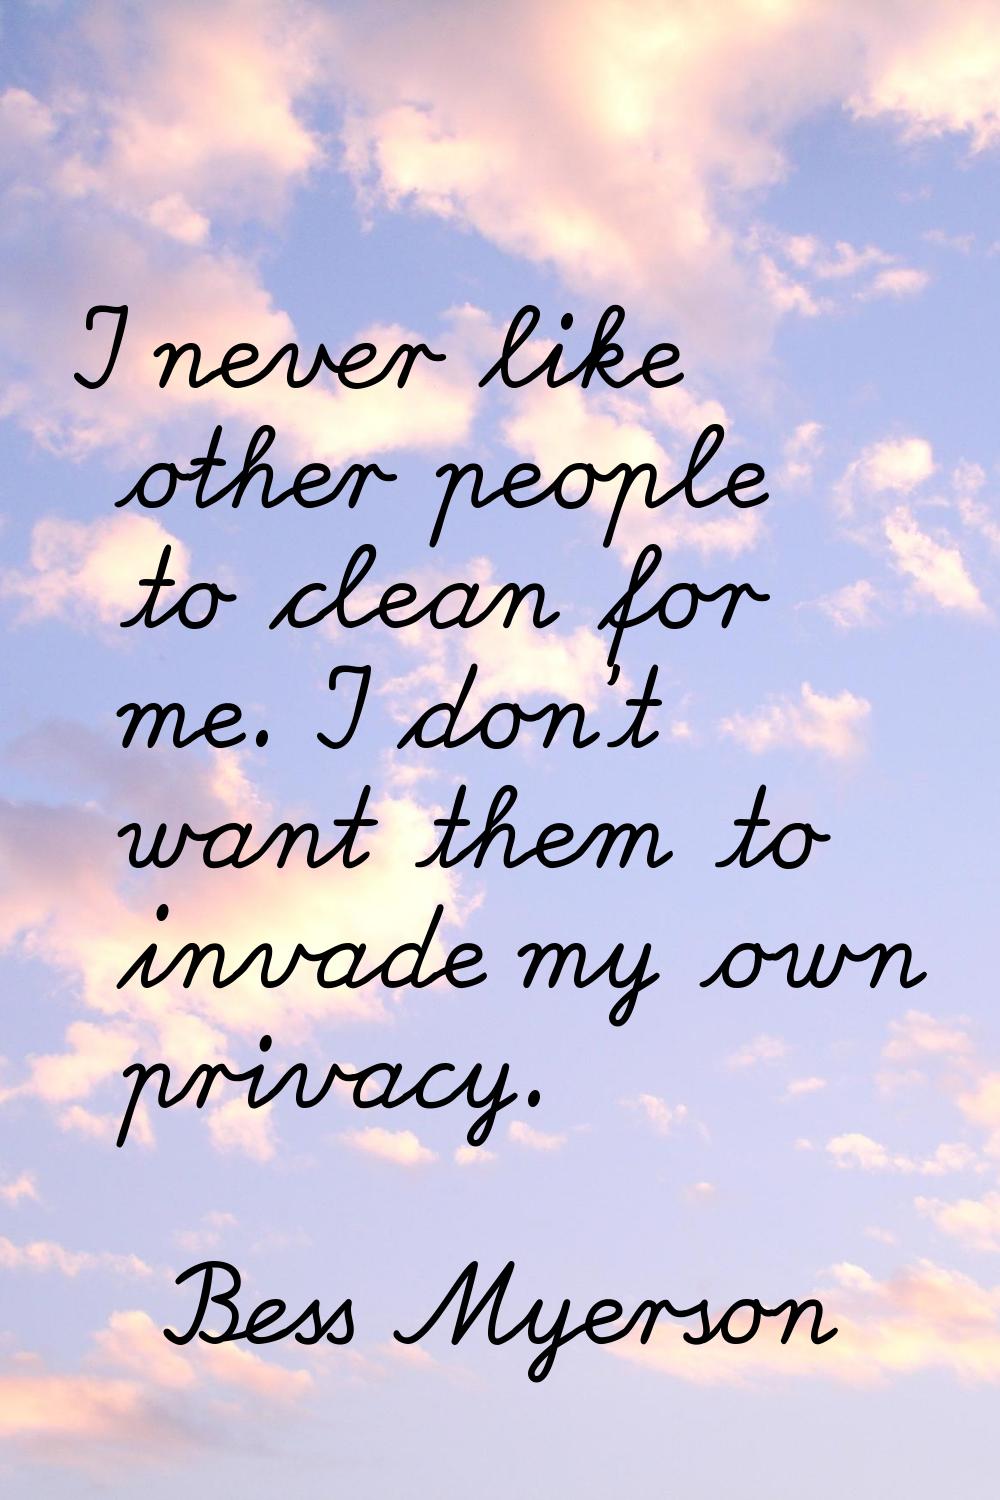 I never like other people to clean for me. I don't want them to invade my own privacy.